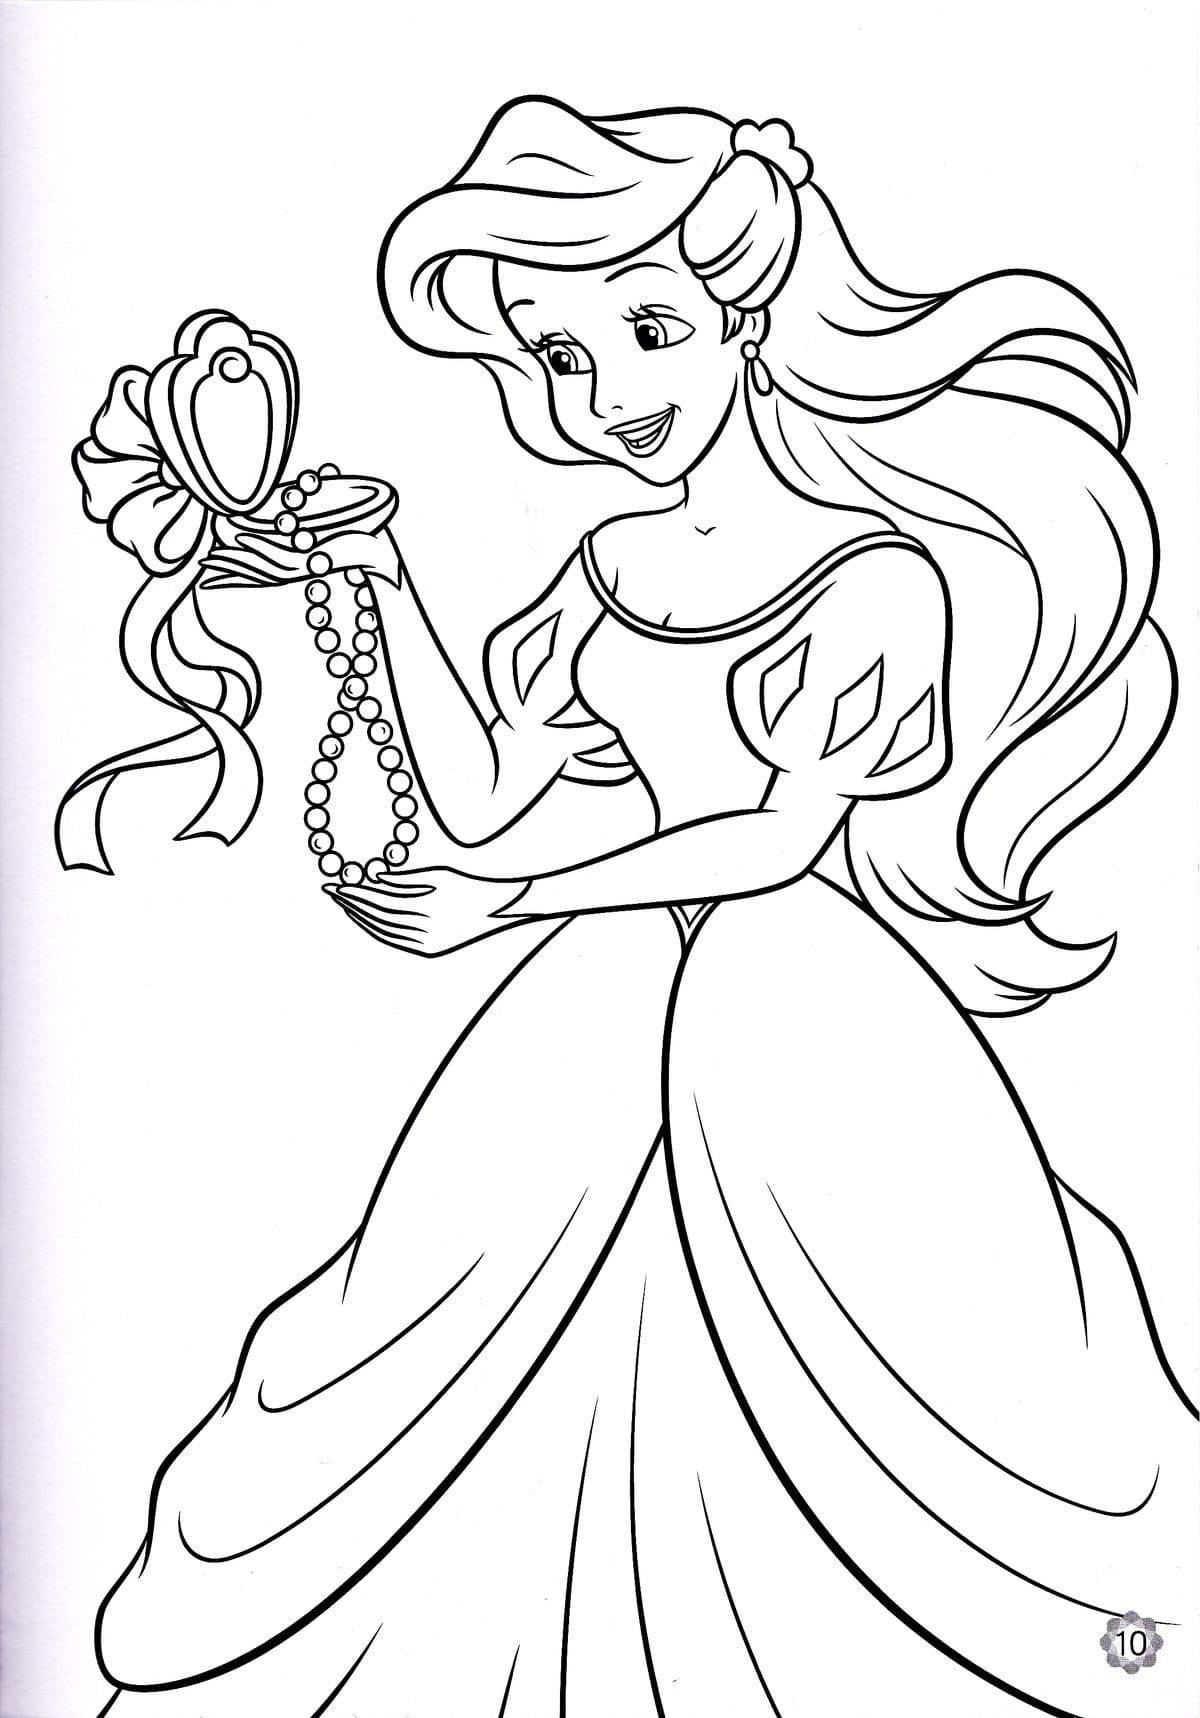 Gorgeous coloring book for children 6-7 years old princess